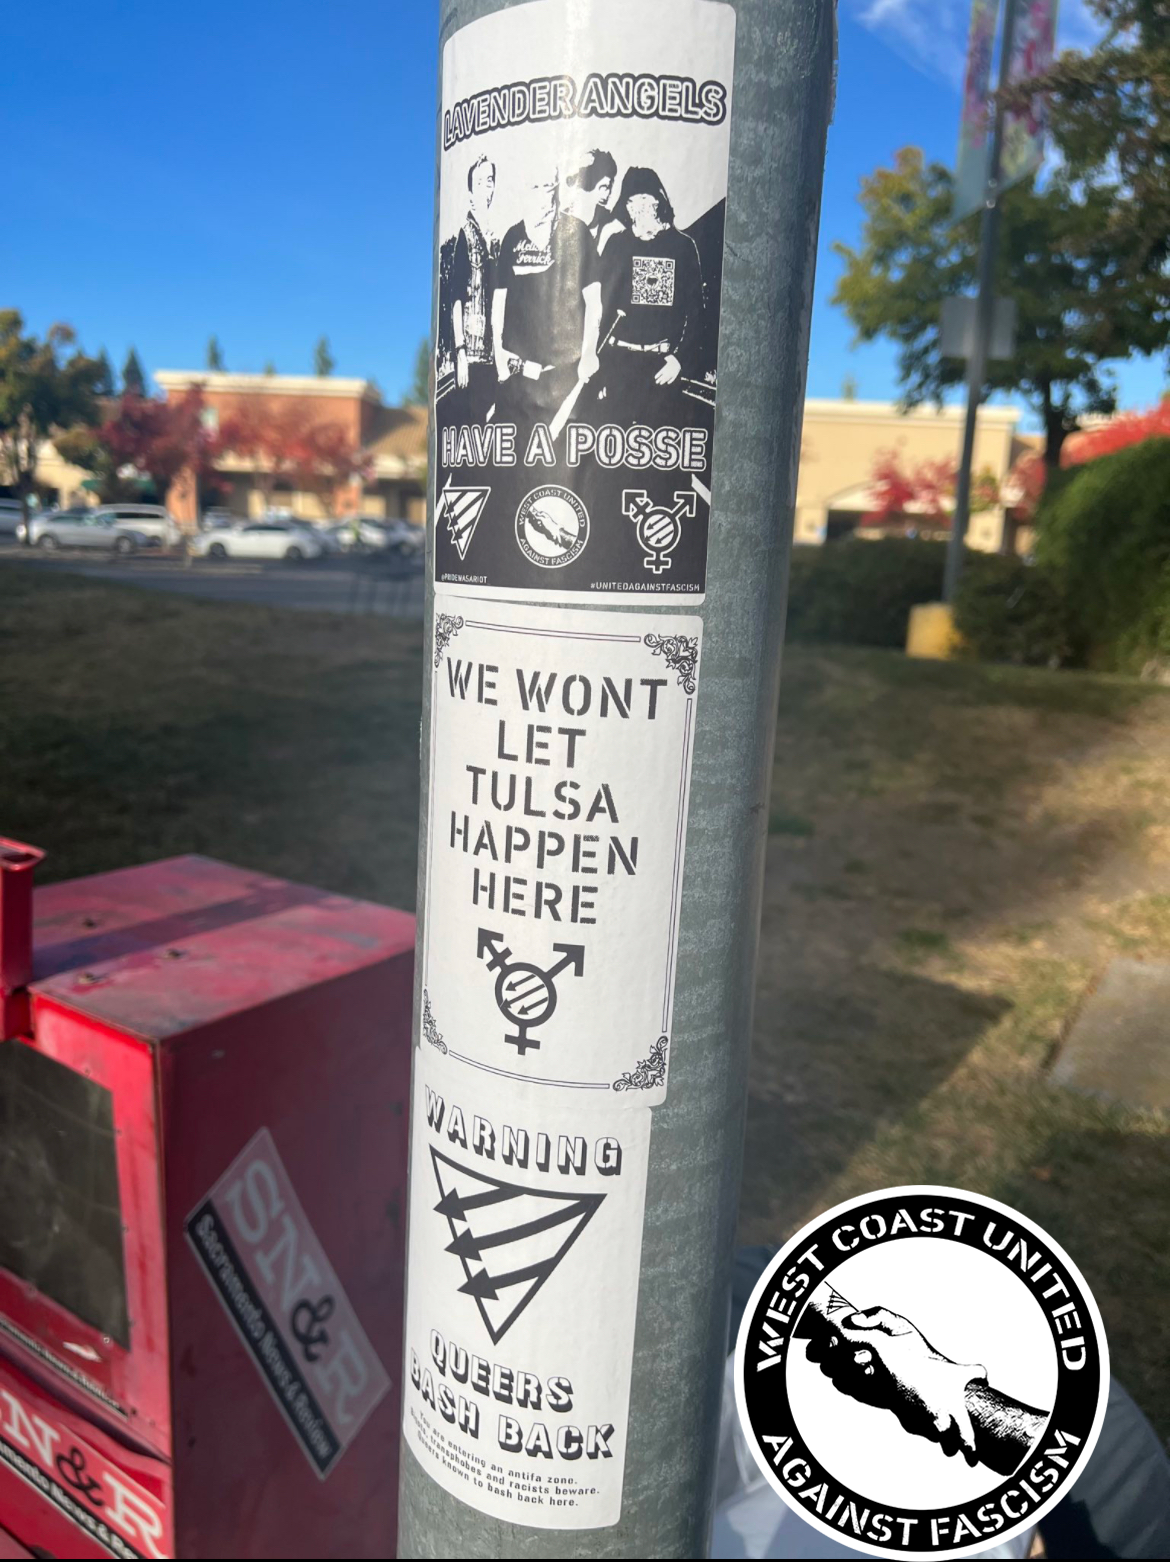 A metal post has three flyers adhered to it top to bottom. The background appears to be an outlet mall with cars. The first flyer reads "Lavender Angels Have A Posse." with the WCUAF logo, a Queer Front, and a Trans Front symbol. The second image reads "We Wont Let Tulsa Happen Here." with a Trans Front symbol. The third reads "Warning, Queers Bash Back" with a Queer Front symbol.